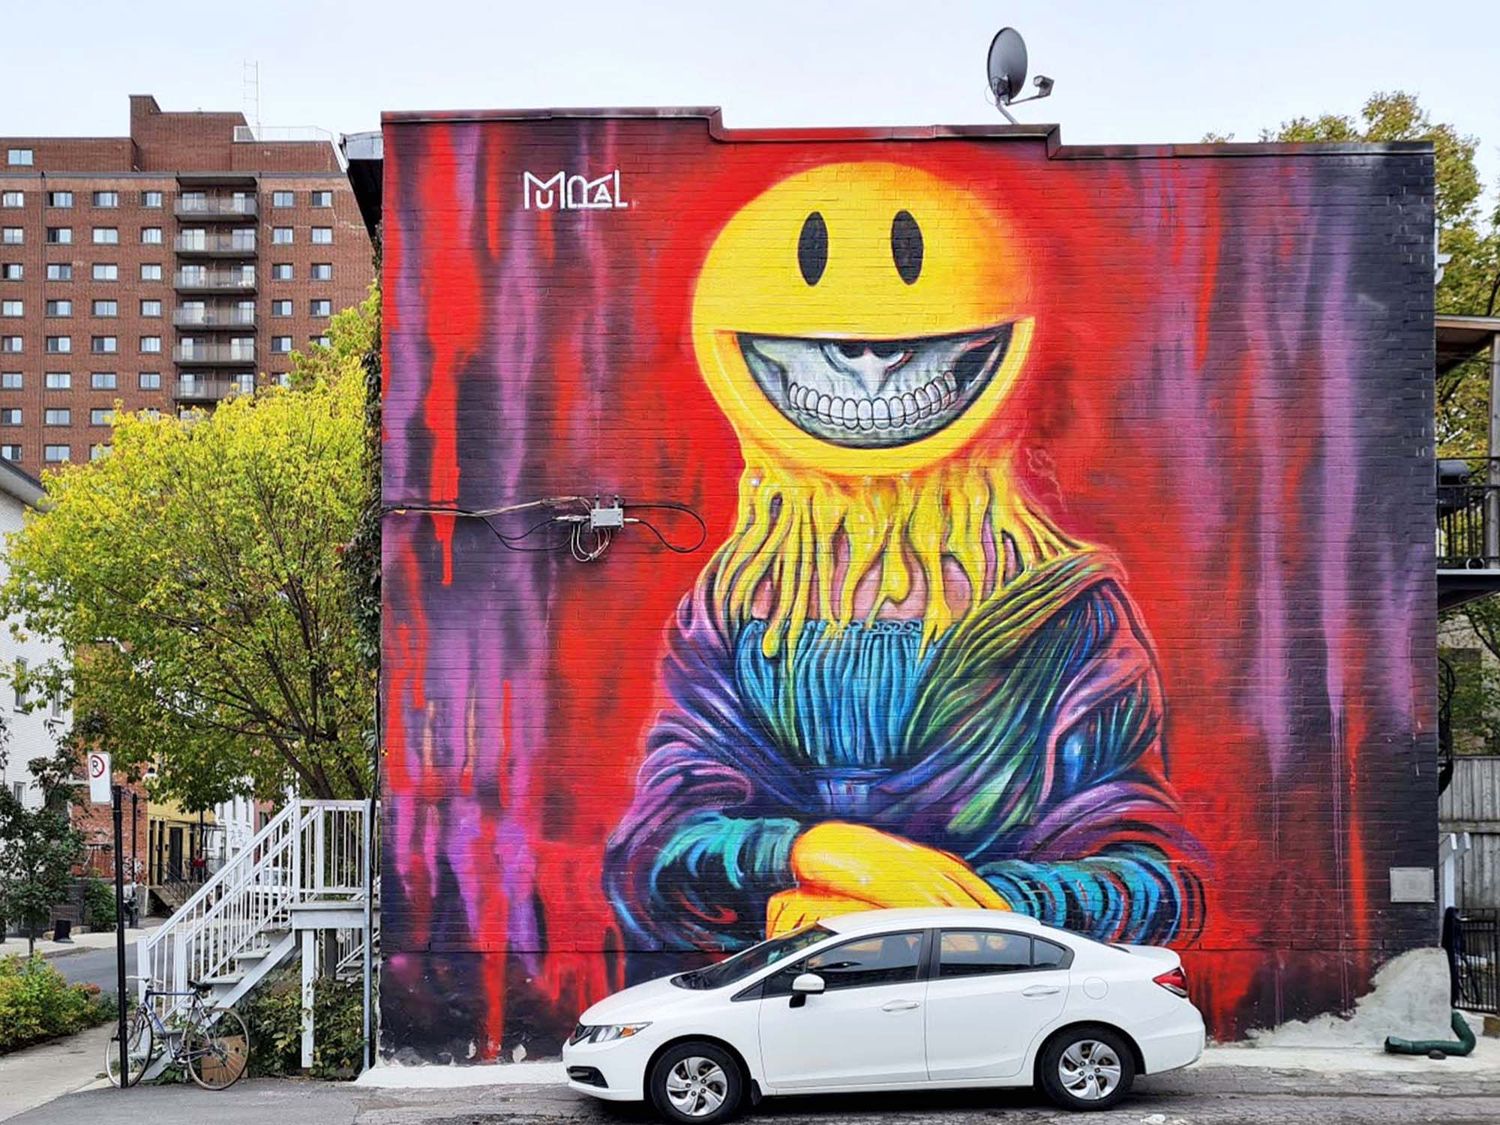 Devoted to the promotion of Urban Art in all its forms, the MURAL Festival is much more as it features large murals, musical shows, digital installations and technology exhibitions (@Ron English).